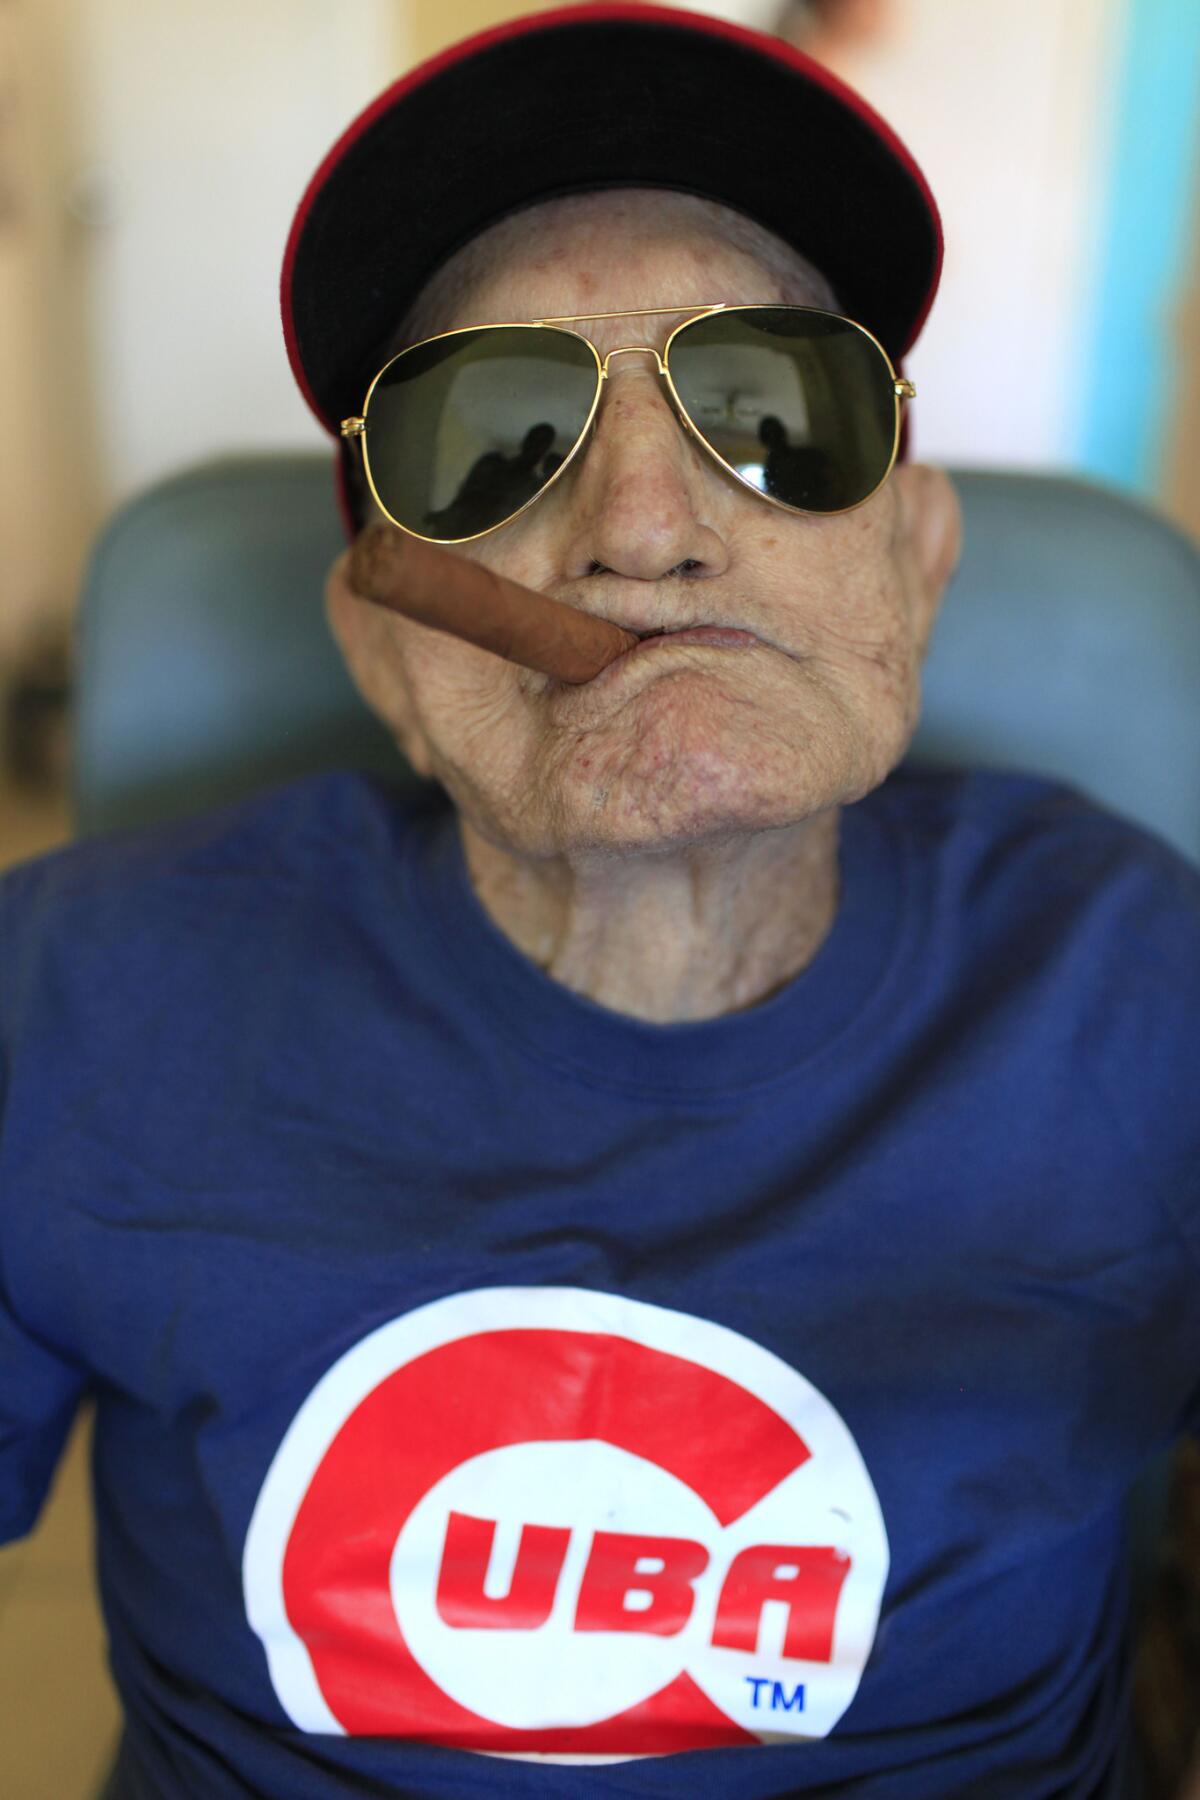 Conrado Marrero, the world's oldest living former Major League Baseball player, poses for a photo on his 102 birthday at his home in Havana, Cuba, on April 25, 2013.